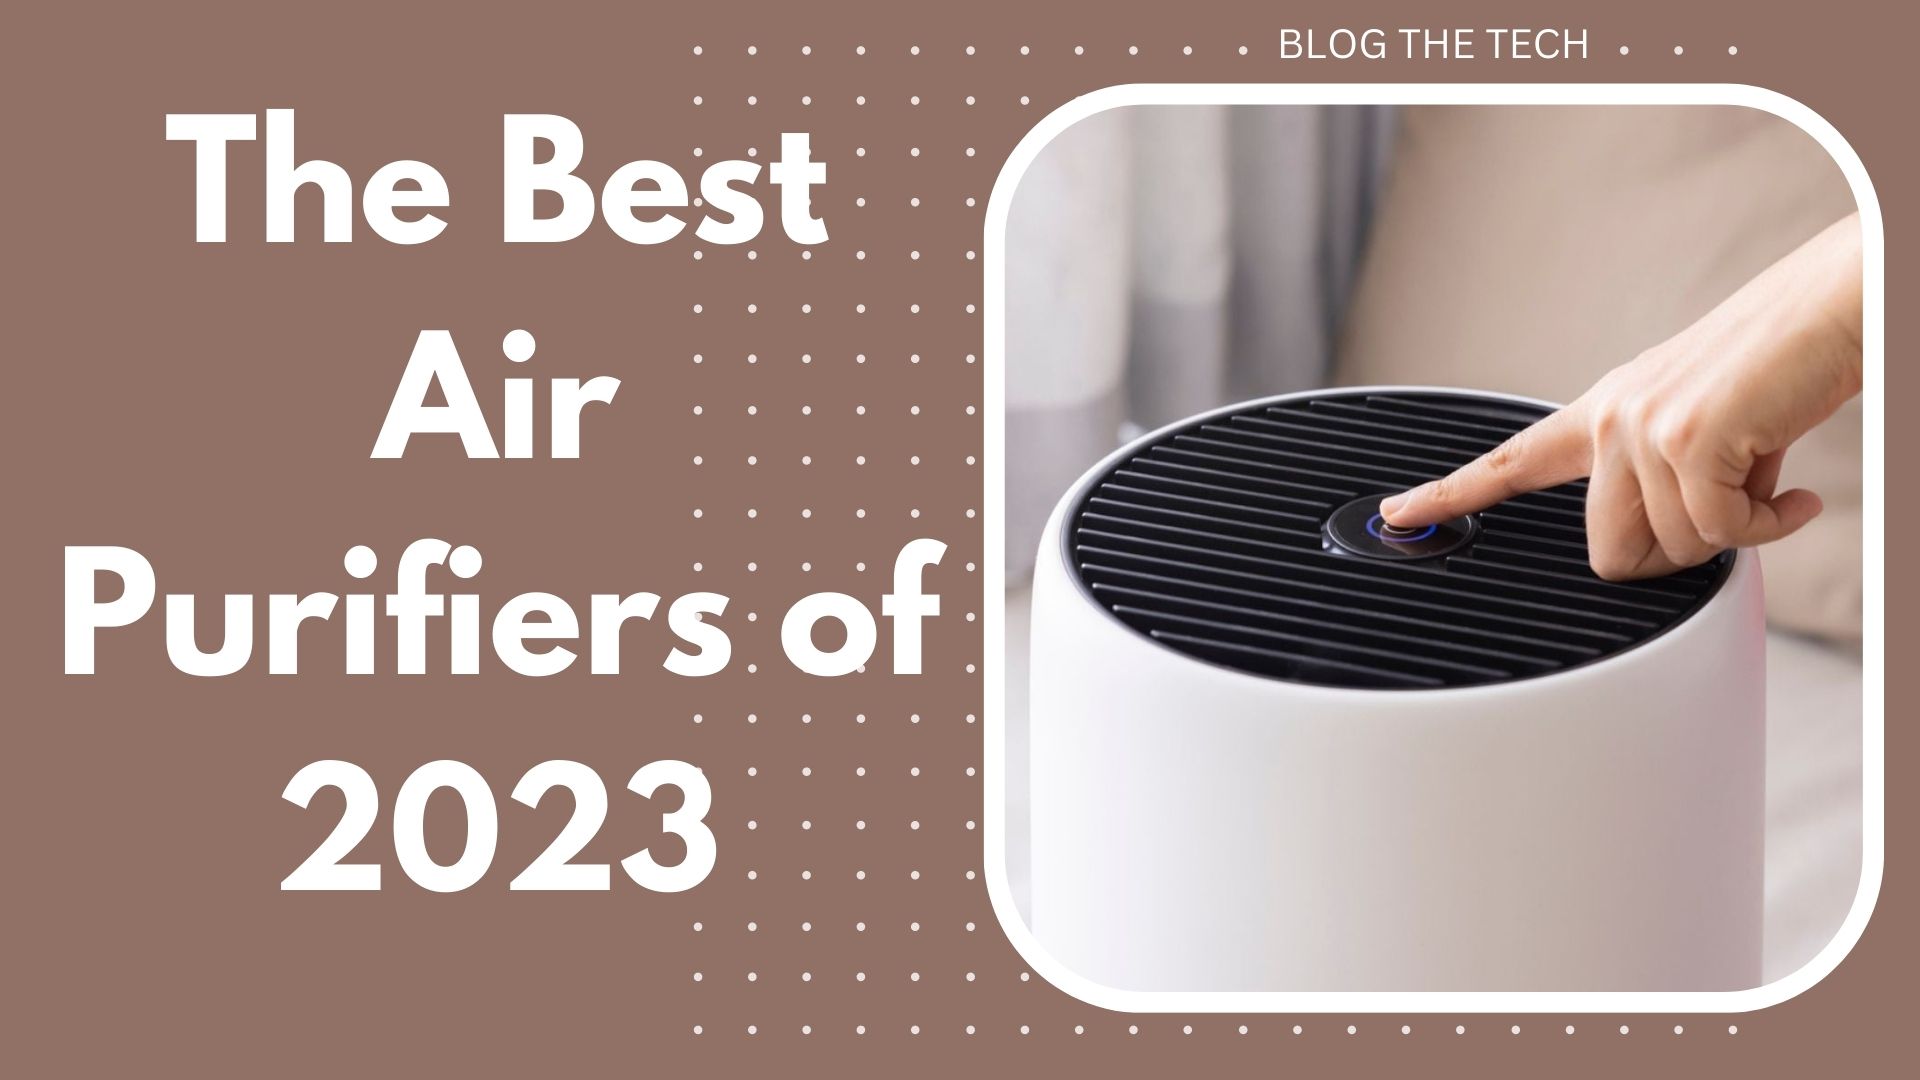 The Best Air Purifiers of 2023